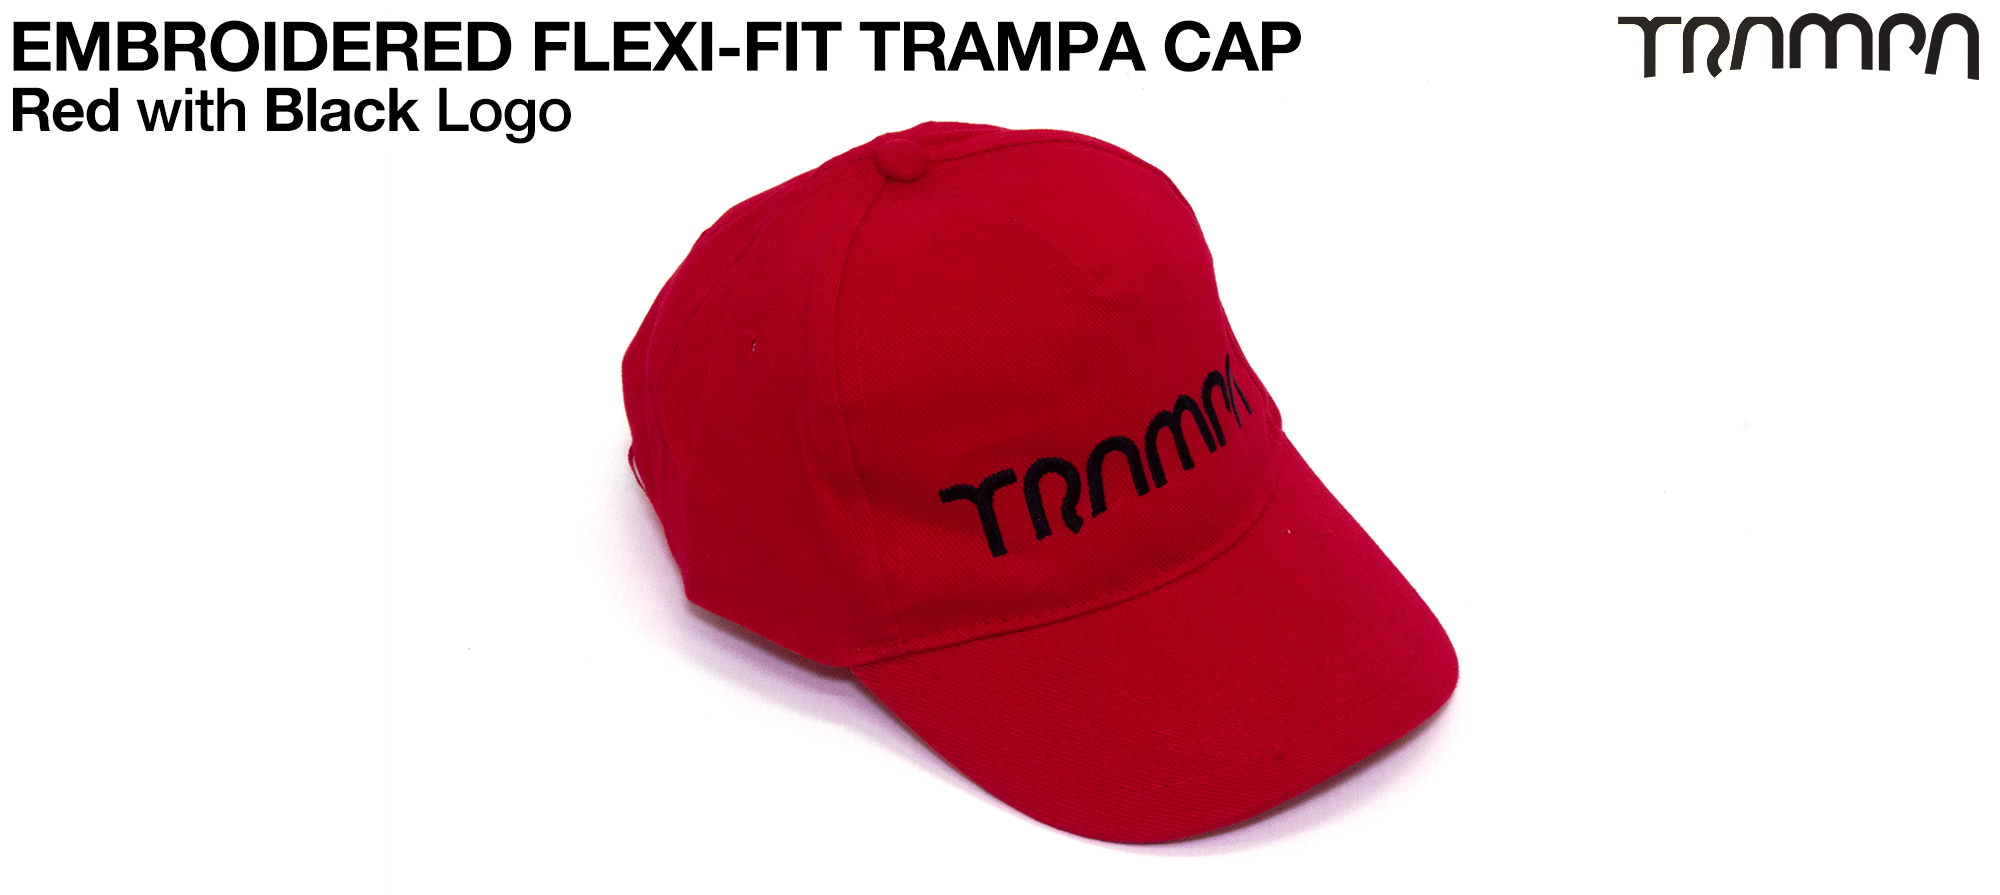 RED with BLACK Embroidered TRAMPA logo 5 Panel FLEXI-FIT Cap - LARGE / X-LARGE